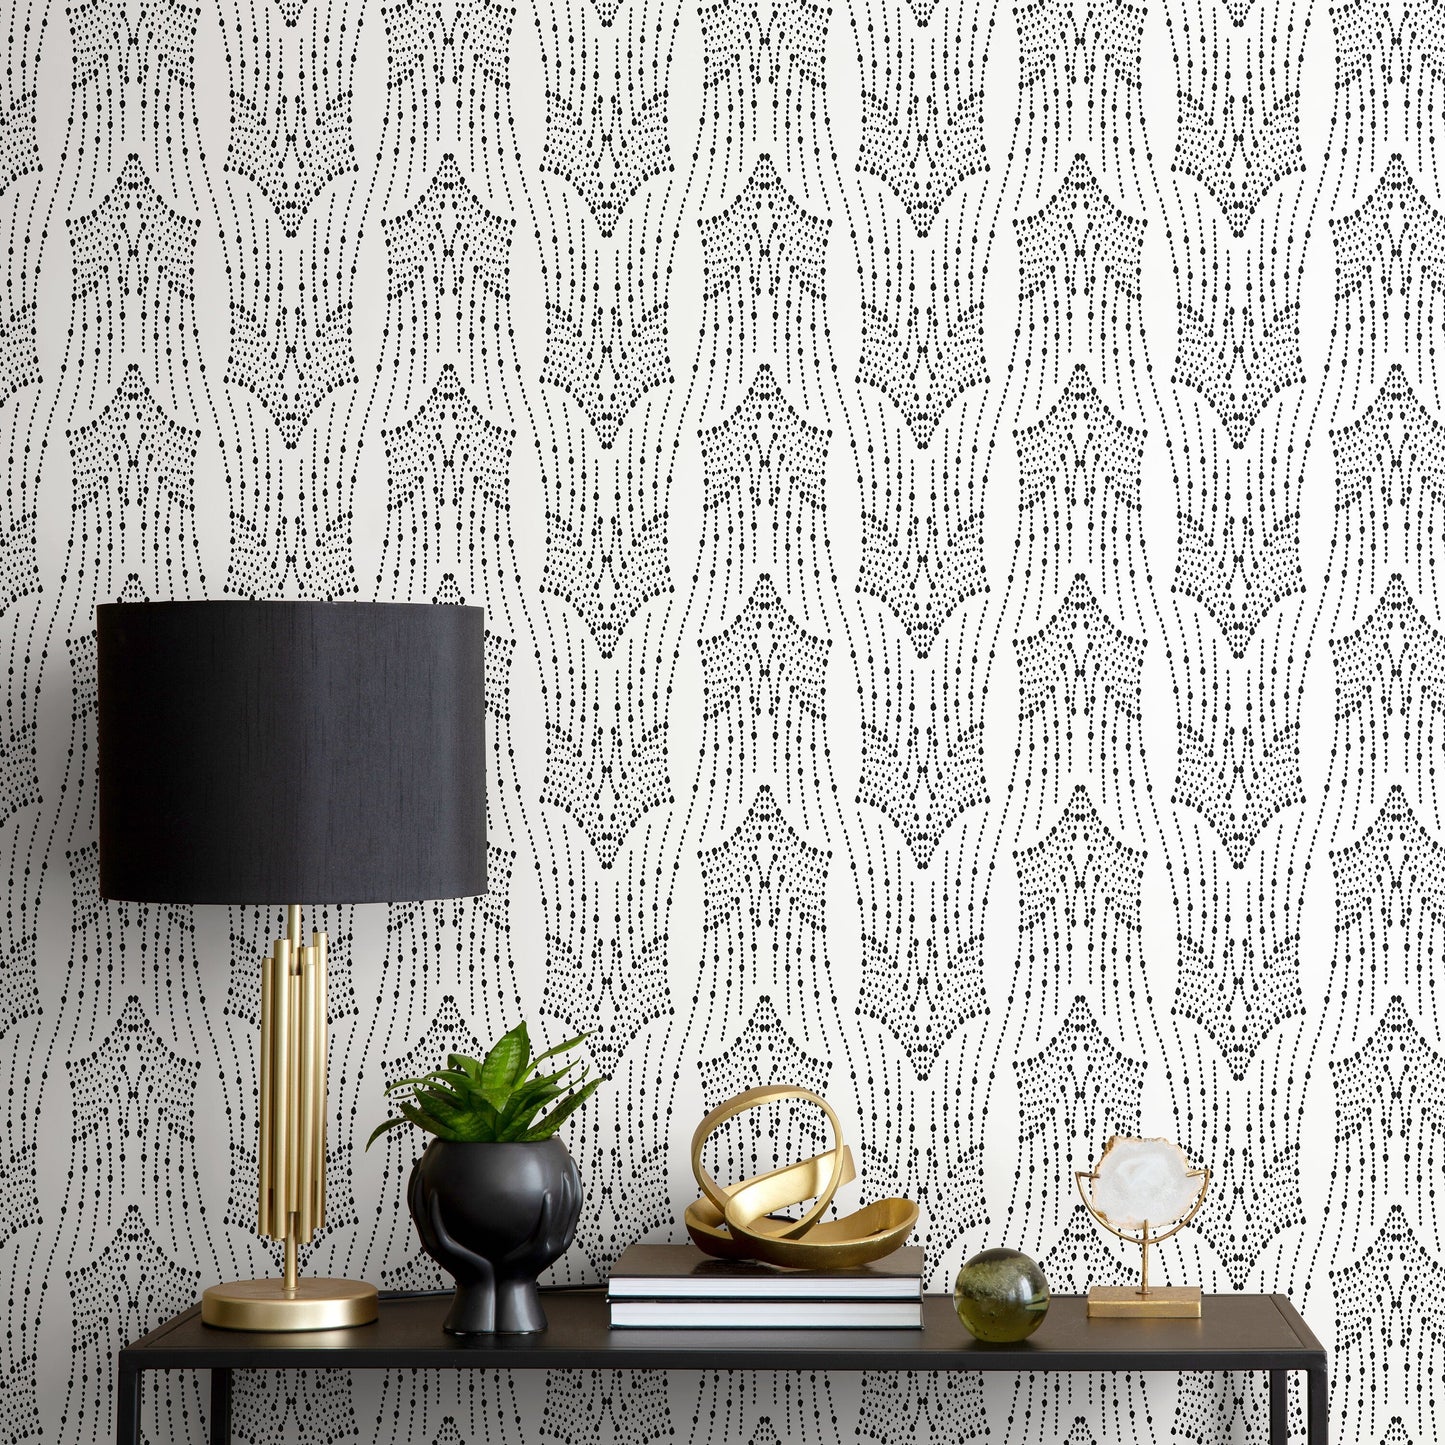 Black and White Abstract Wallpaper / Peel and Stick Wallpaper Removable Wallpaper Home Decor Wall Art Wall Decor Room Decor - C868